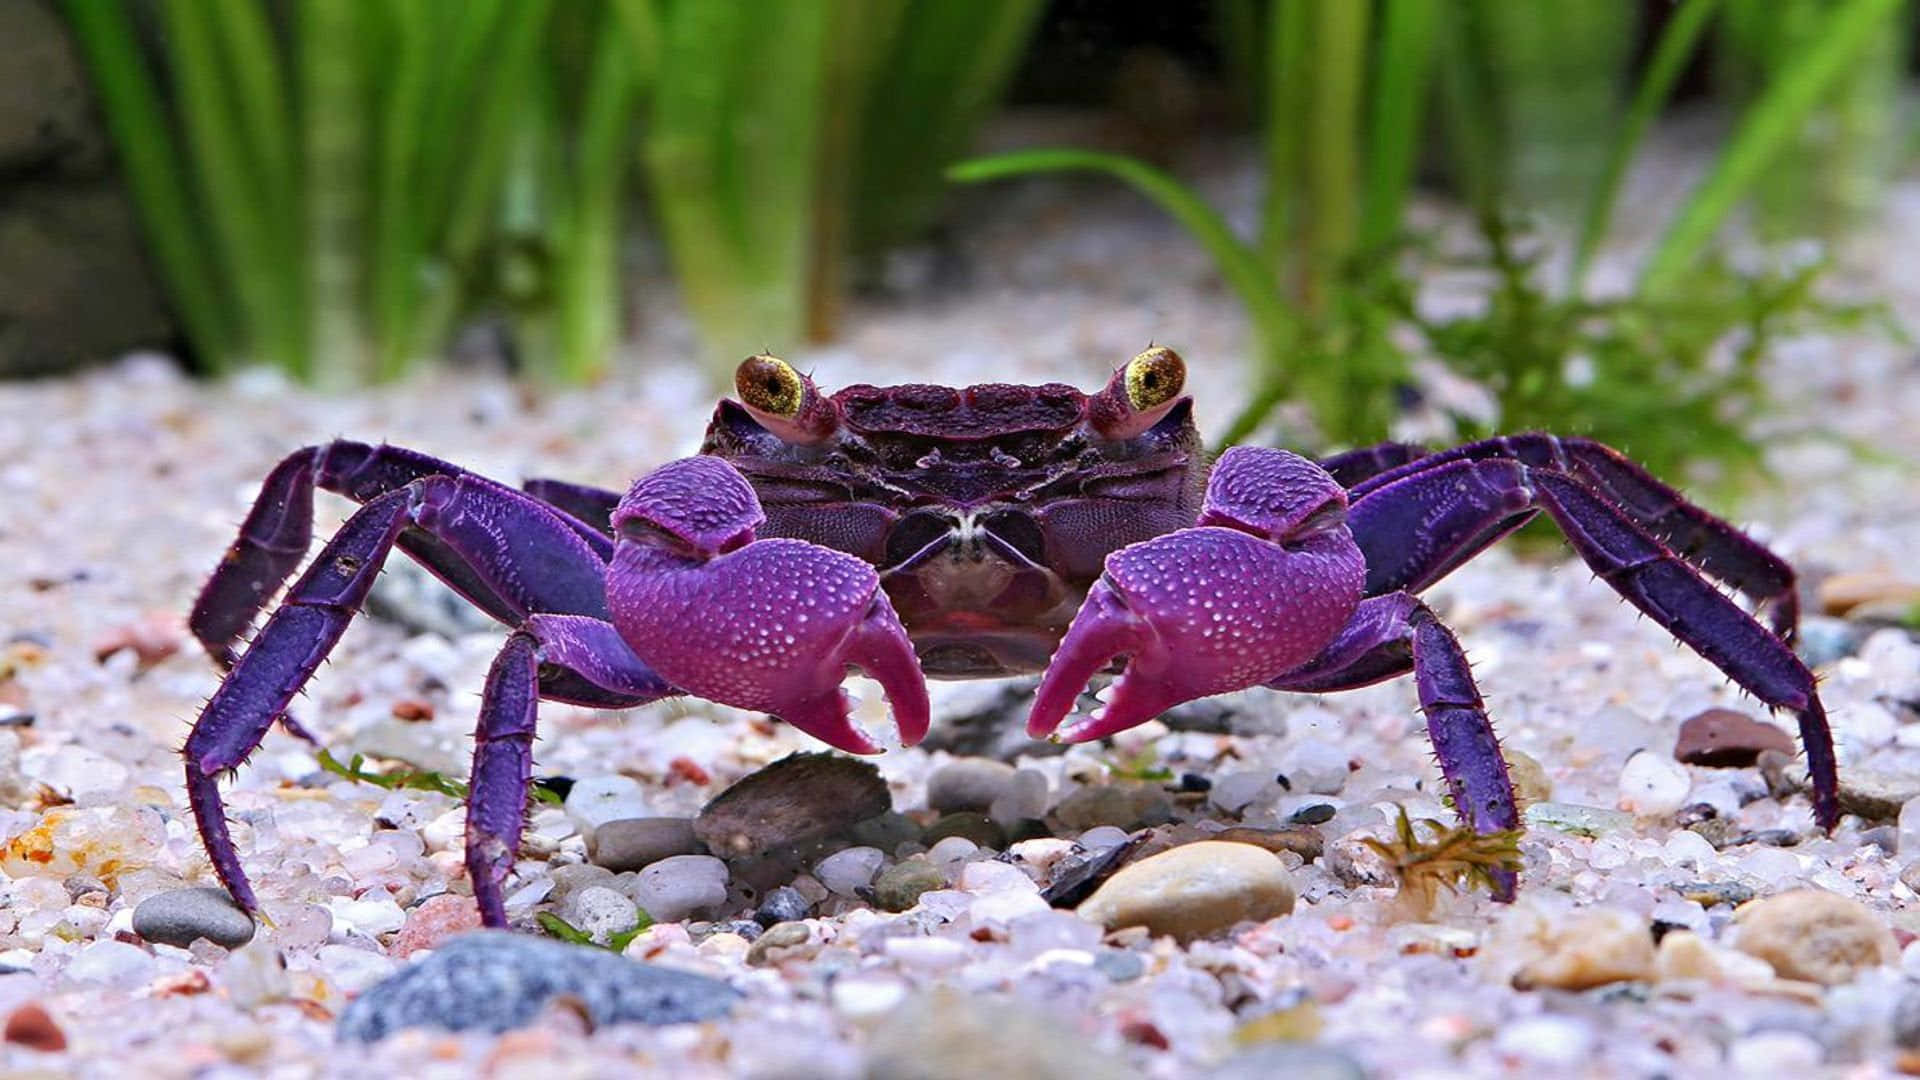 "close Up Of Majestic Red Crab On A Beach"